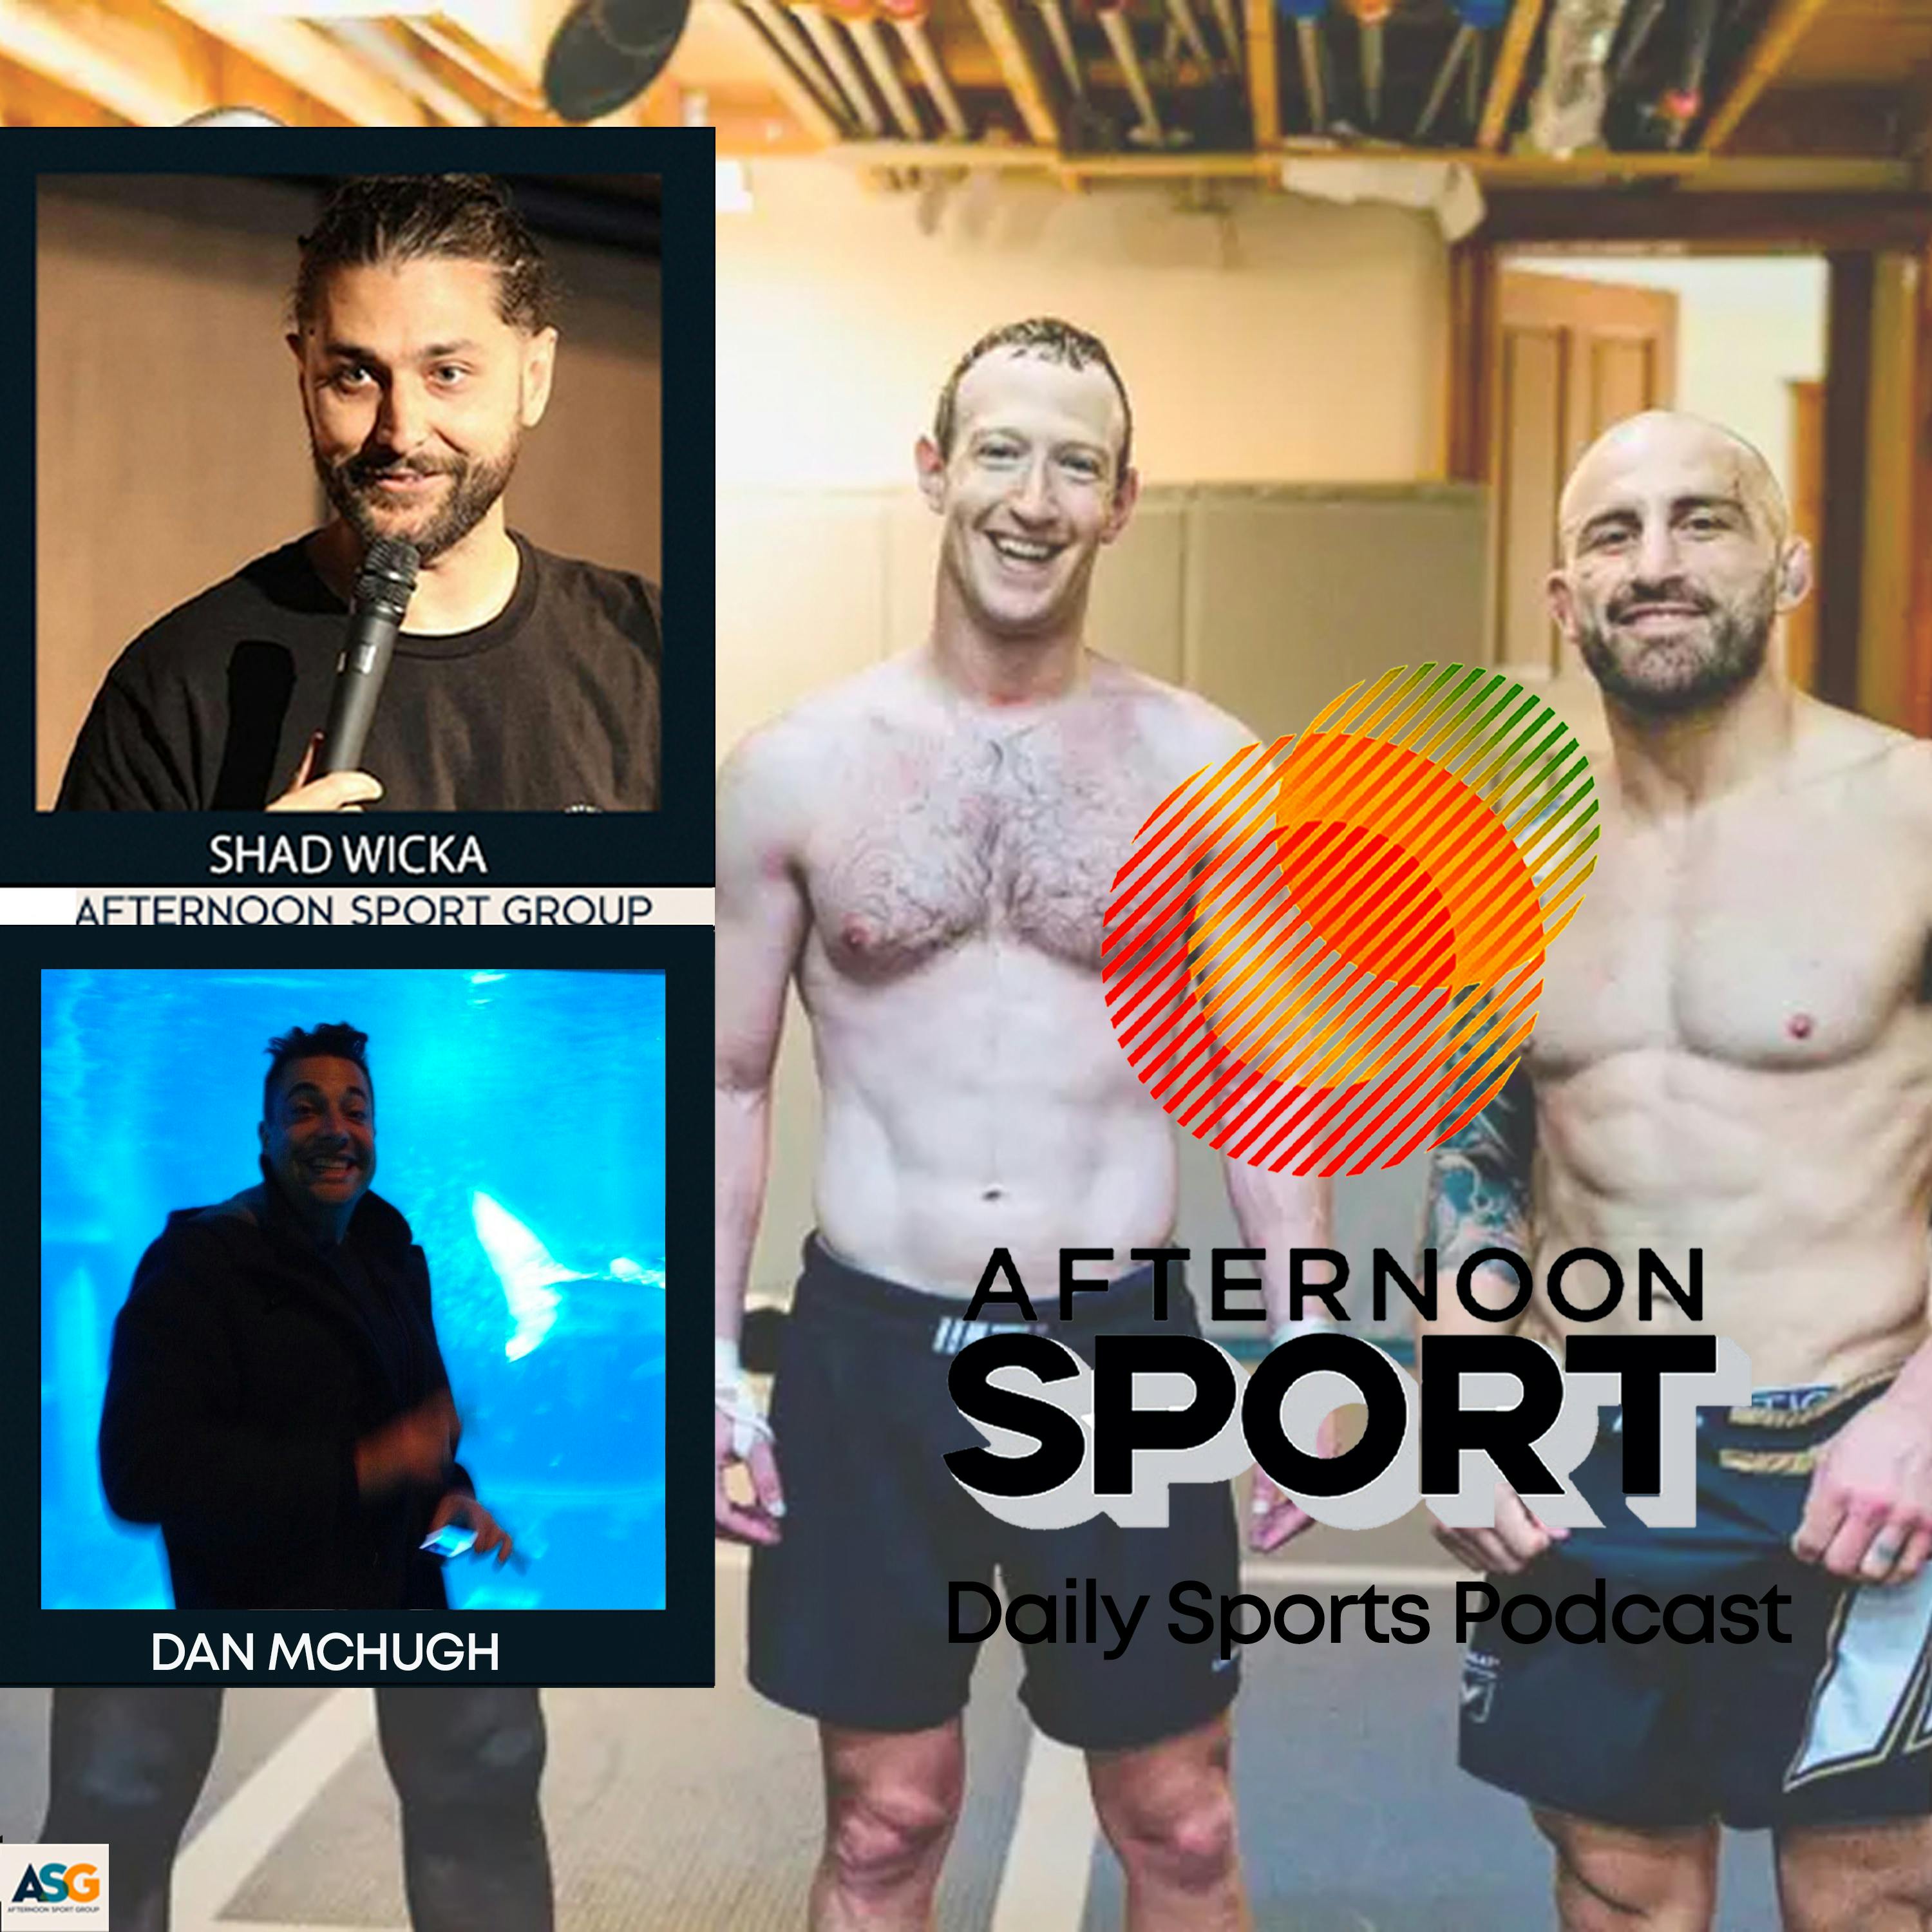 13th July Shad Wicka & Dan McHugh: Origin, the NRL paper bag is a real thing, how far from the beach can you wearing budgie smugglers?, the pointy end of Wimbledon, Tyson v Ngannou, Musk v Zuckerberg�